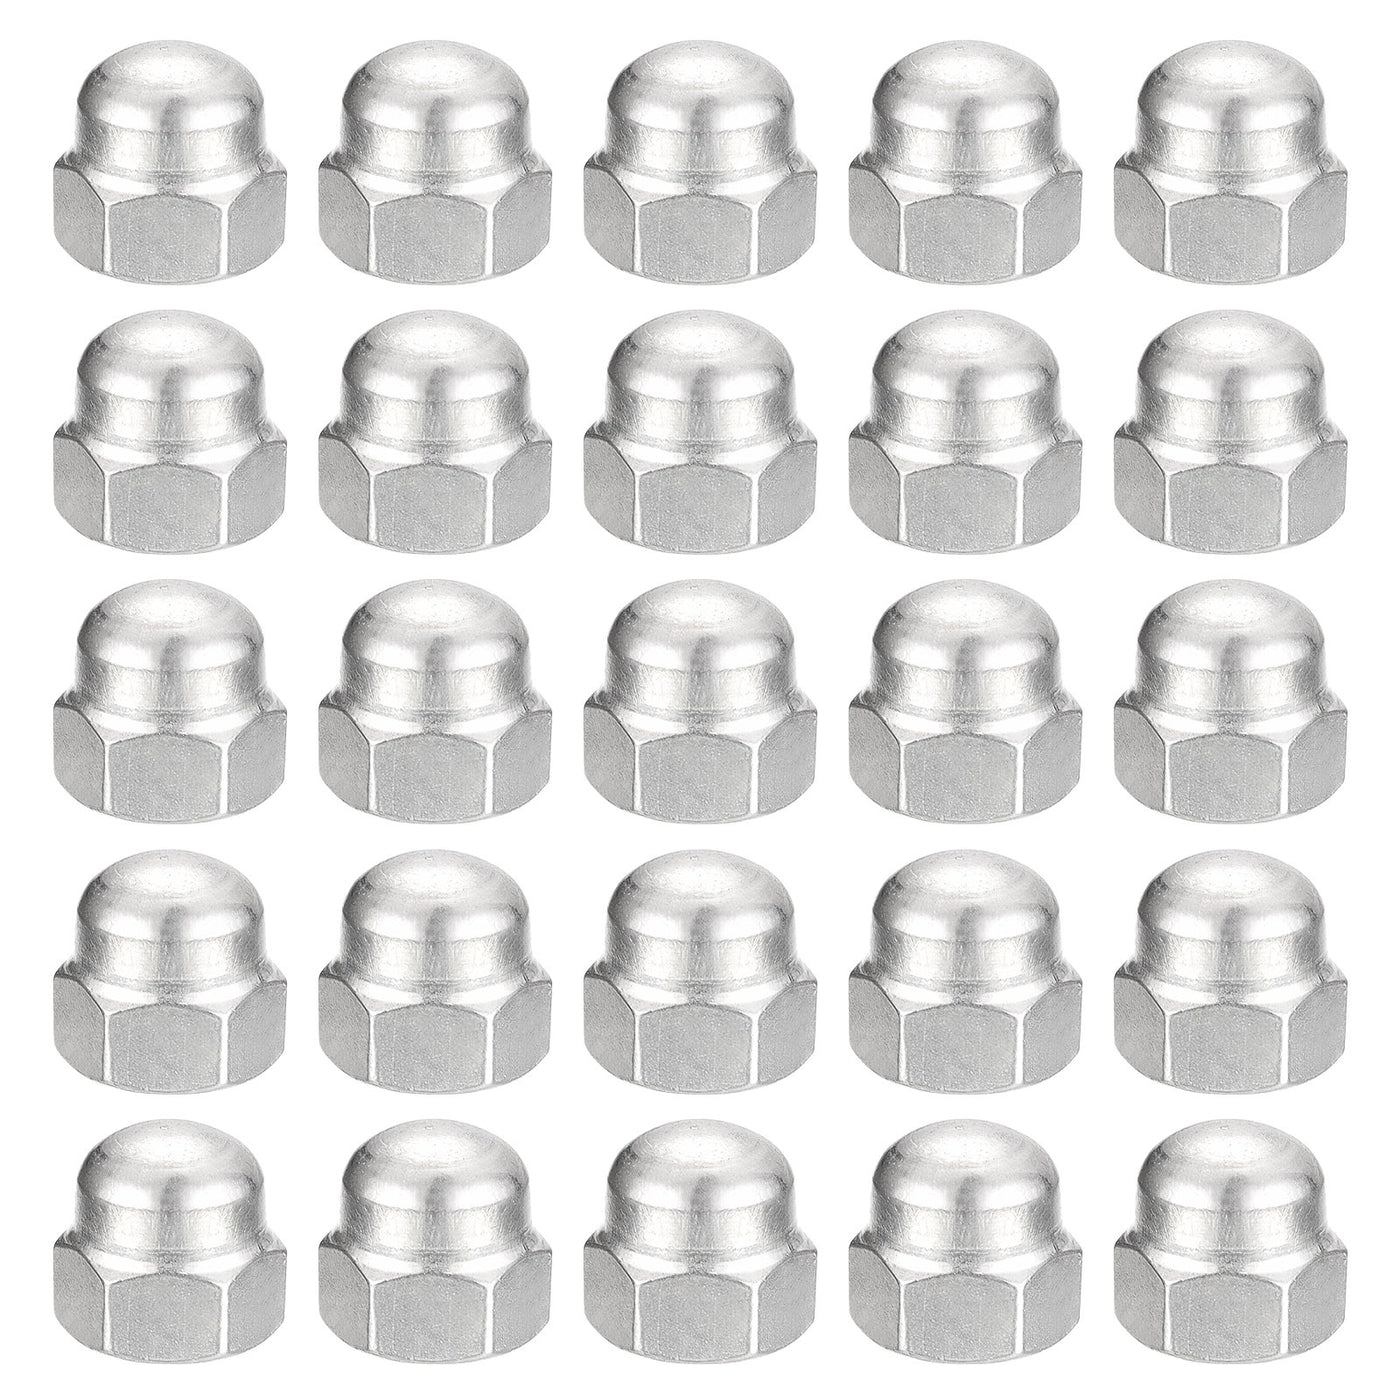 uxcell Uxcell 3/8-16 Acorn Cap Nuts,25pcs - 304 Stainless Steel Hardware Nuts, Acorn Hex Cap Dome Head Nuts for Fasteners (Silver)